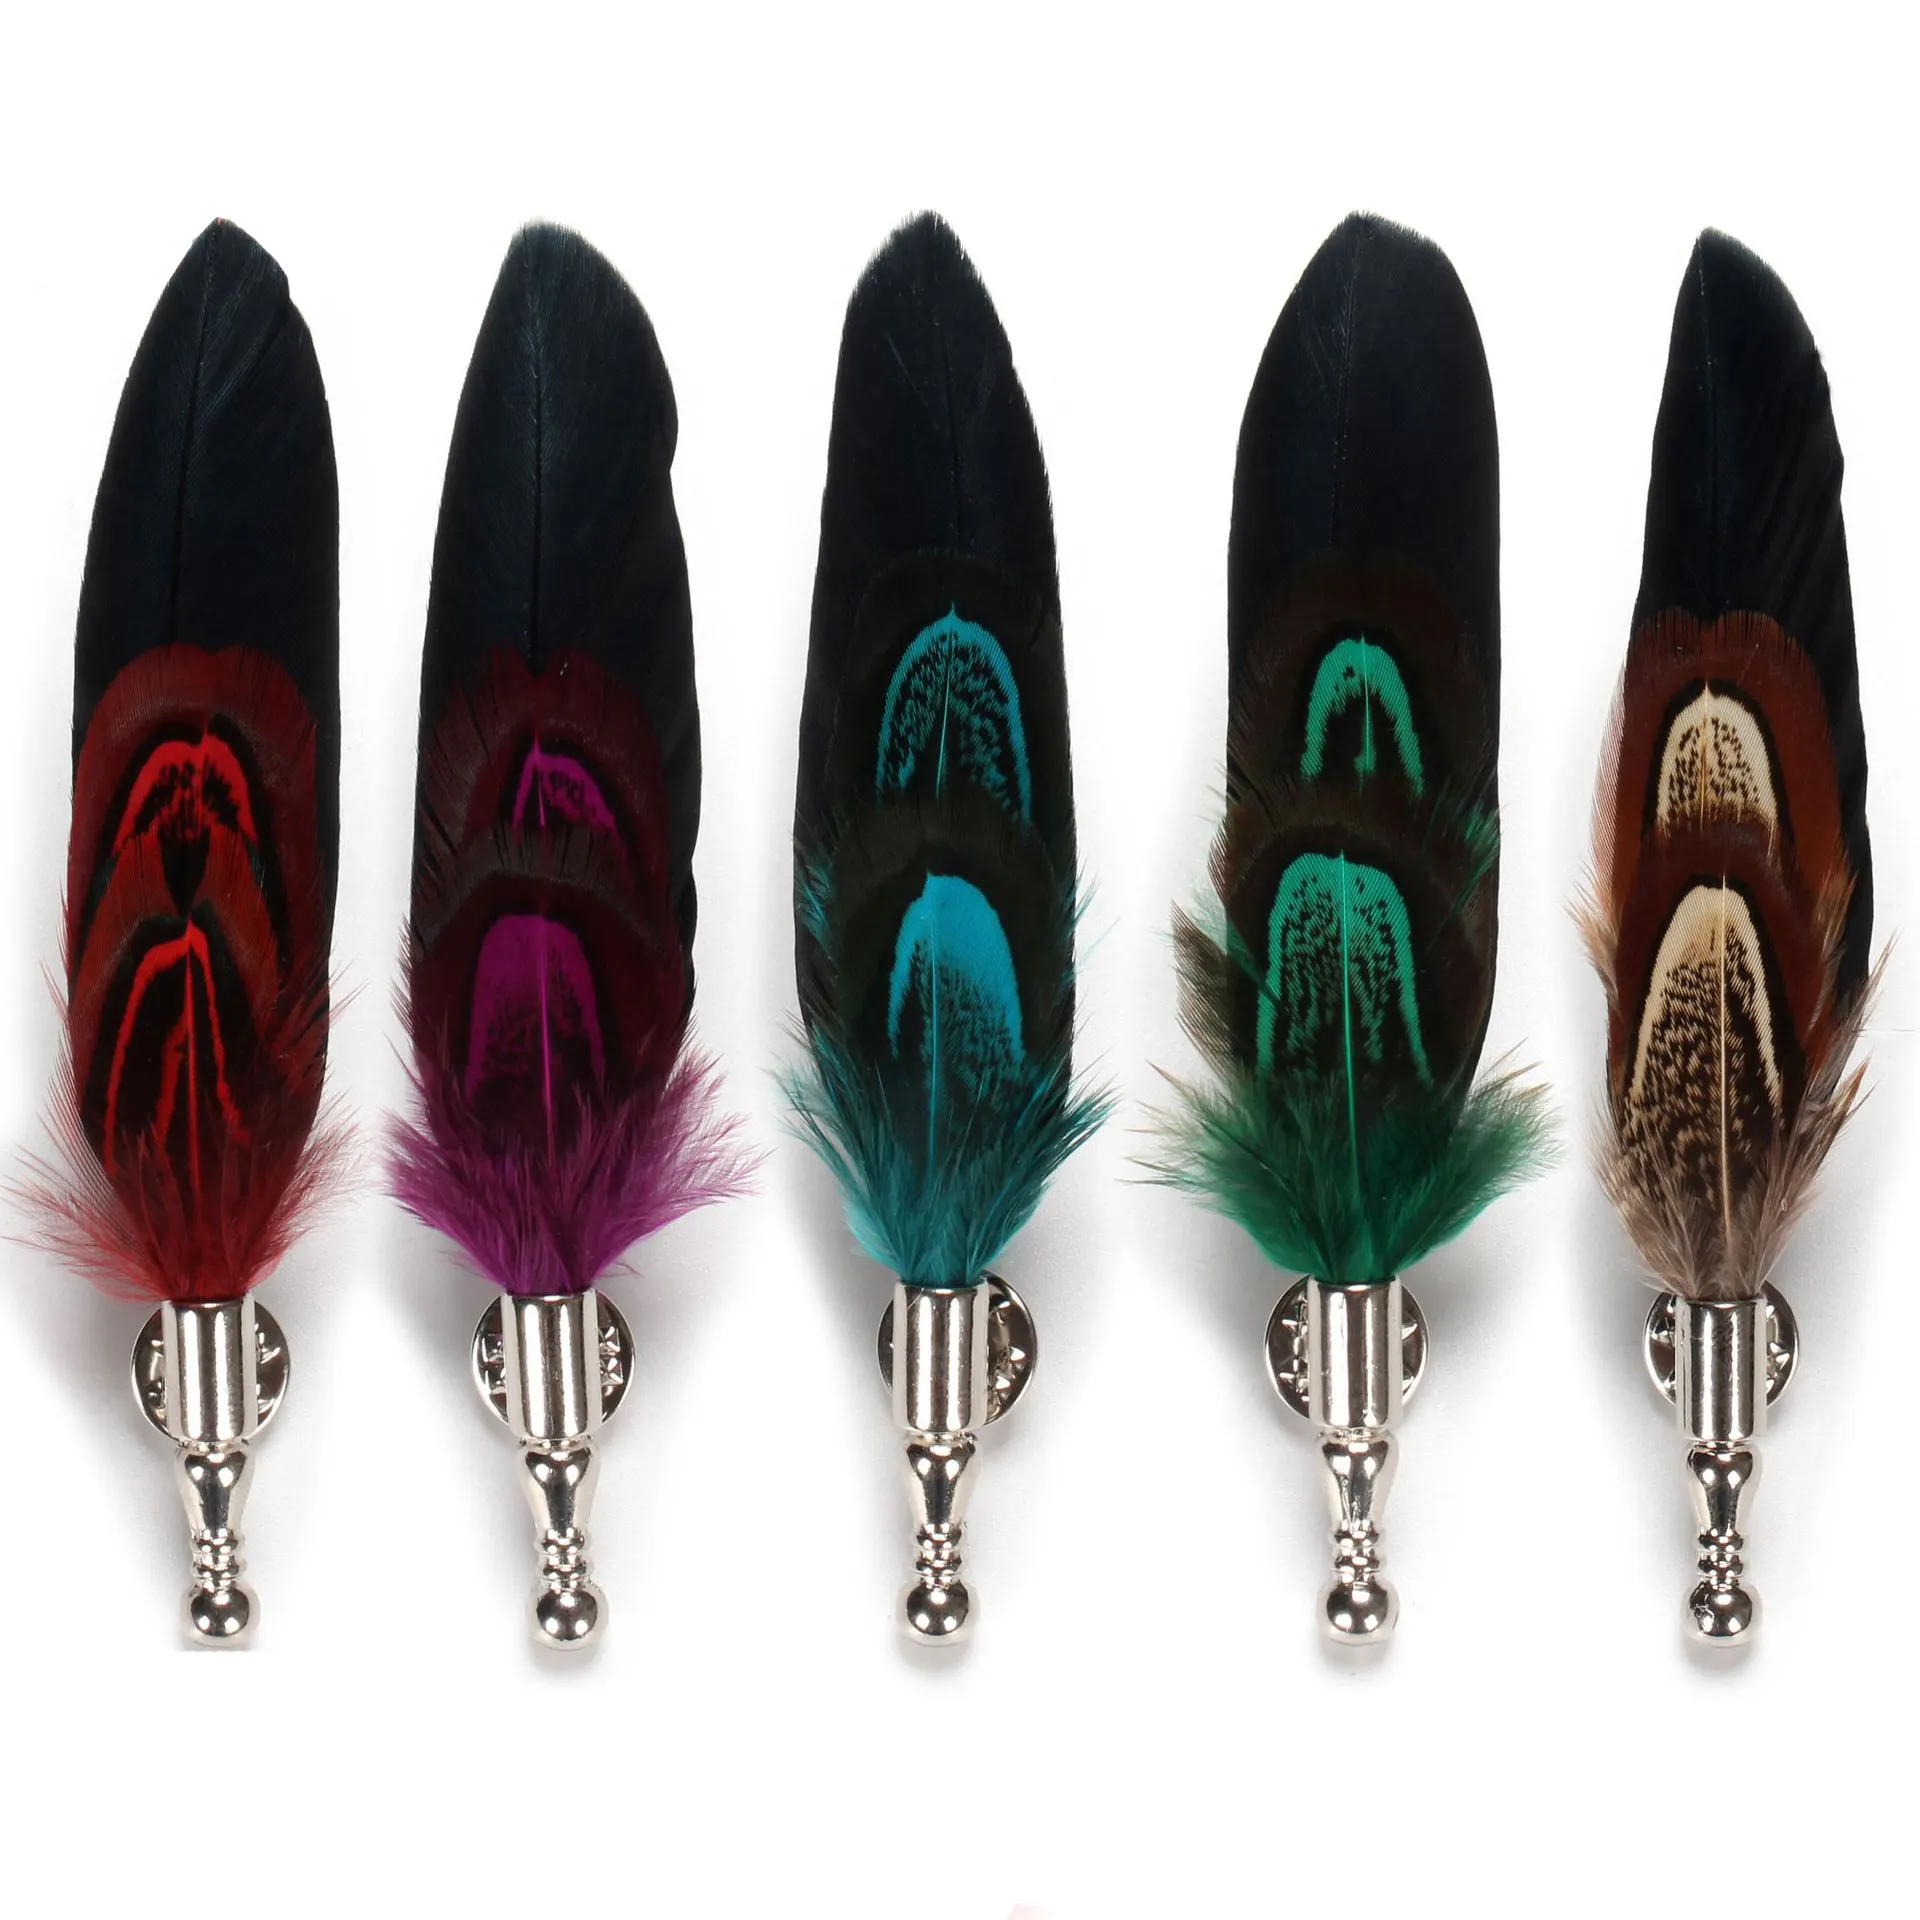 Men Women Novelty Feather Brooch Lapel Pin Brooches Lapel Pins Dress Suit Accessory Gift